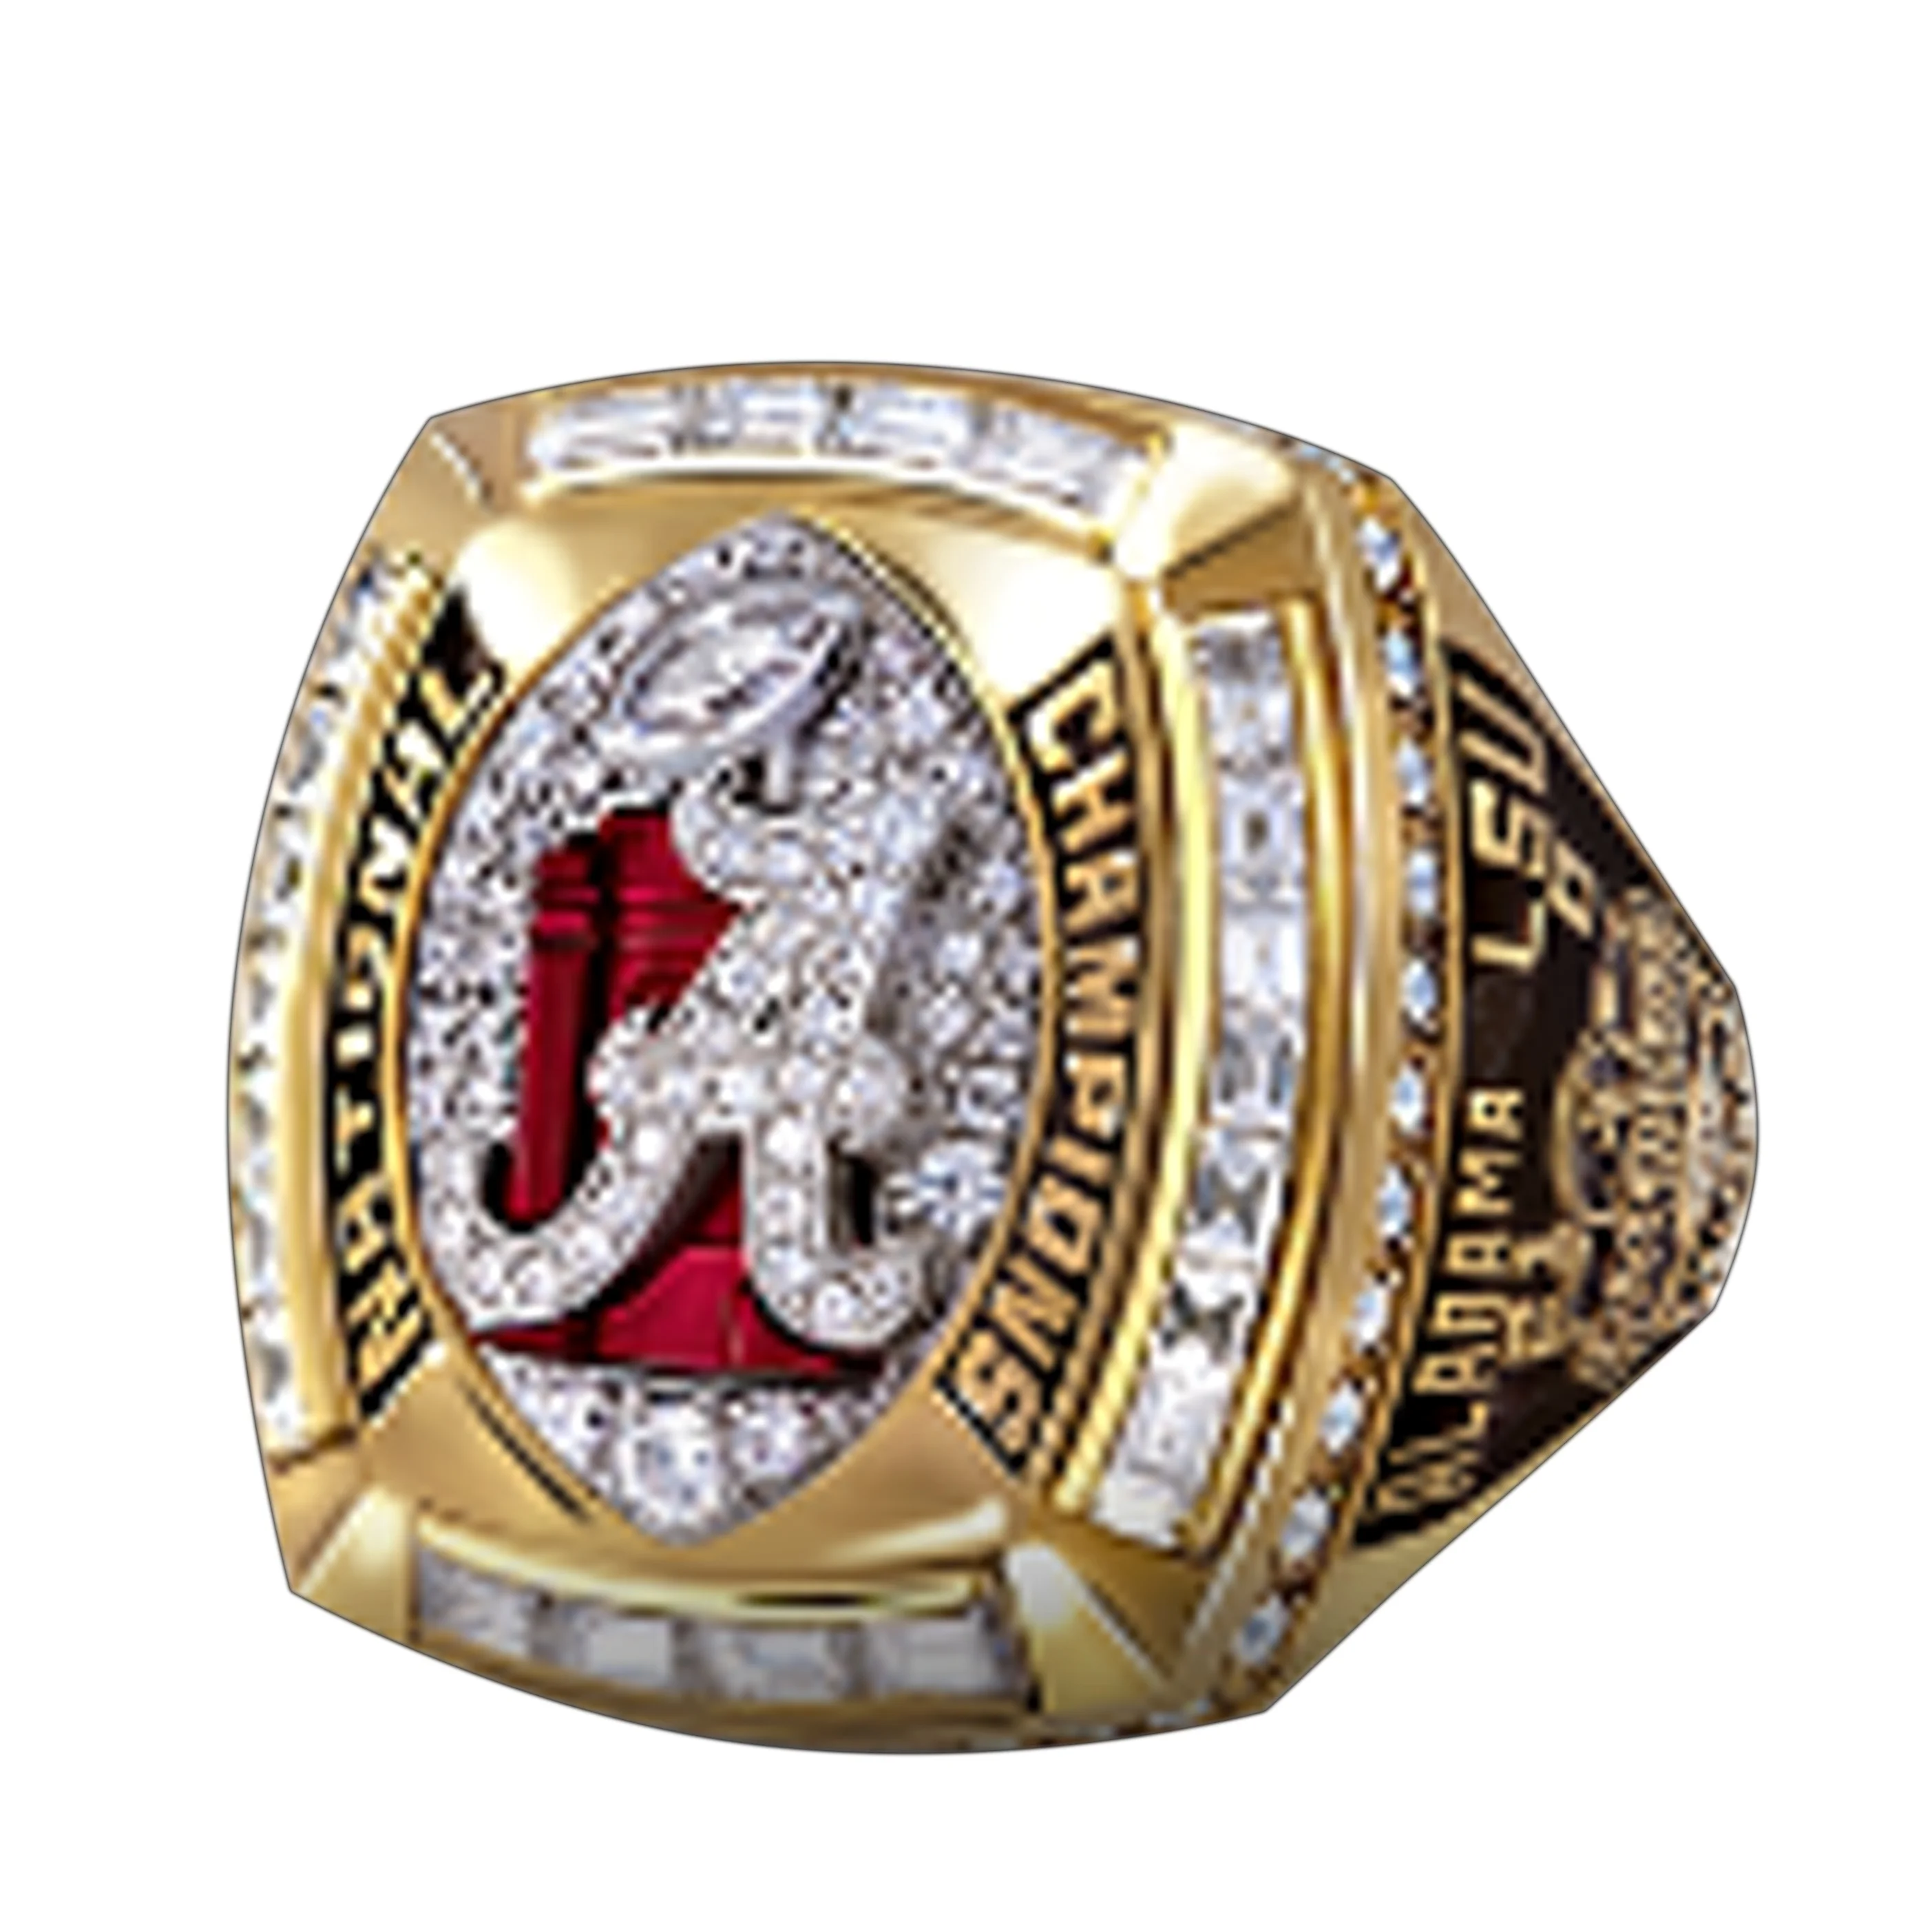 4 Set Championship Rings MLB Oakland Athletics 19721989  Championship  Rings for Sale Cheap in United States